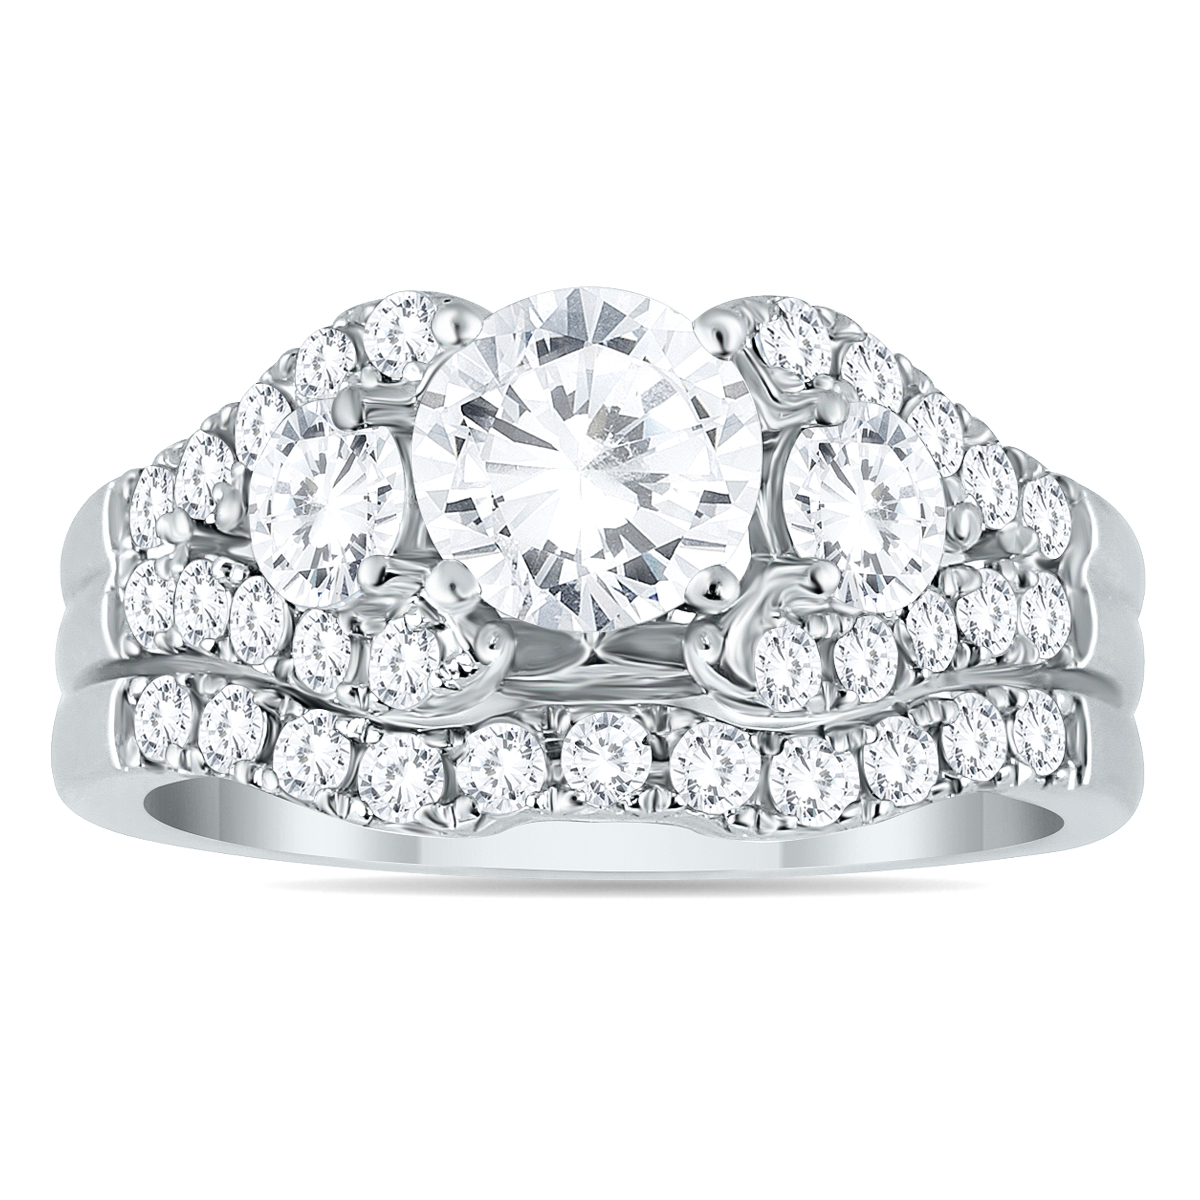 Image of AGS Certified 2 1/5 Carat Diamond Bridal Set in 14K White Gold (I-J Color I2-I3 Clarity)